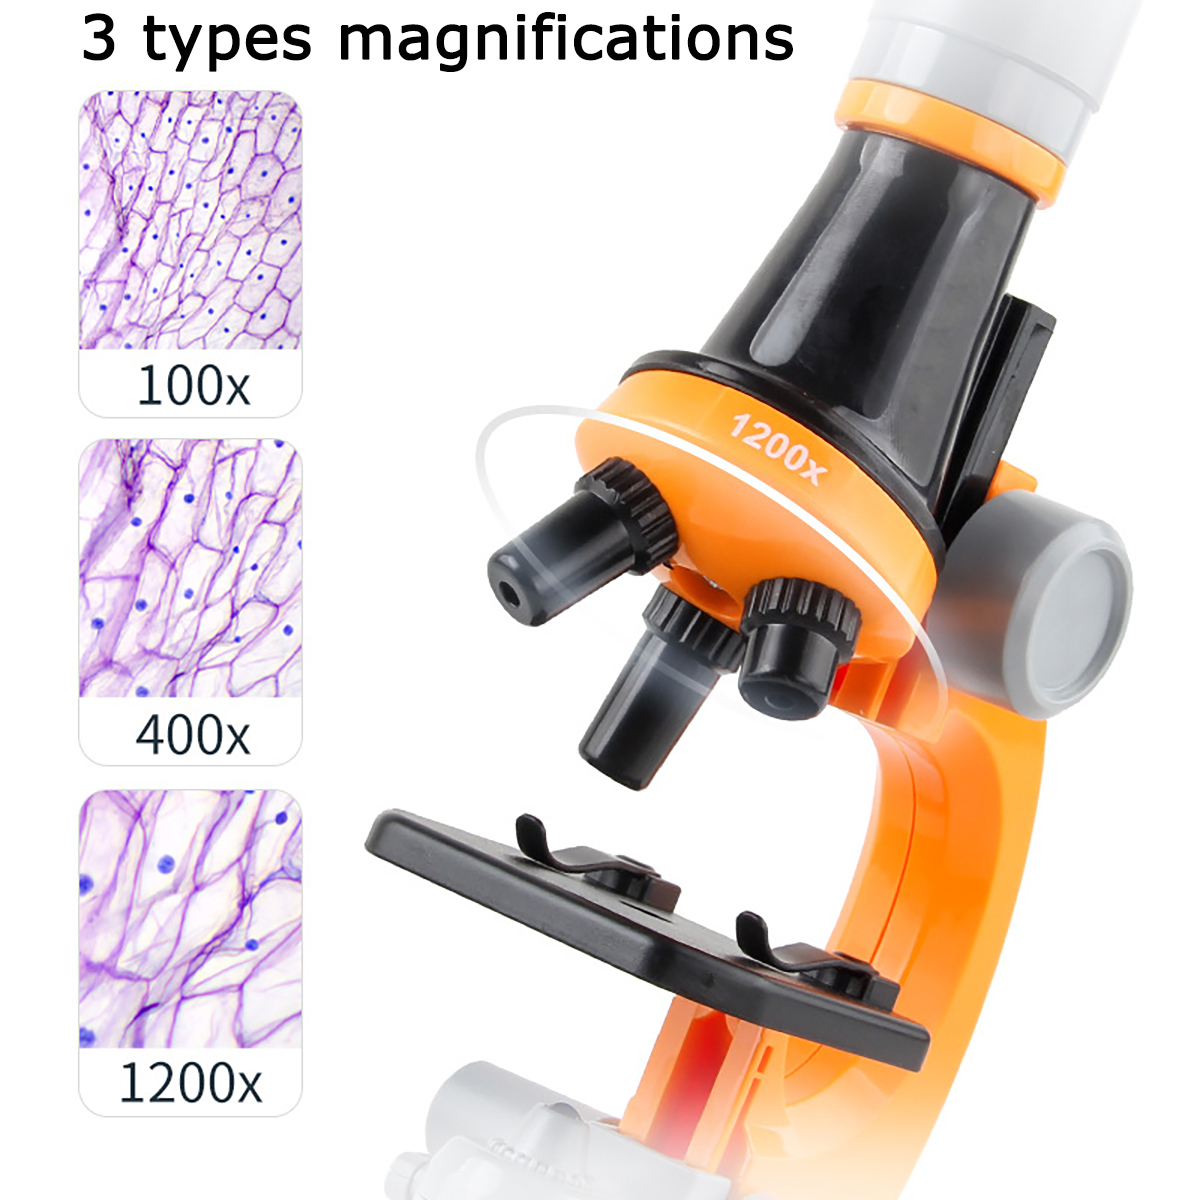 1200X-400X-100X-Magnification-Kids-Microscope-Children-Science-Educational-Toy-for-Science-Experimen-1854876-2